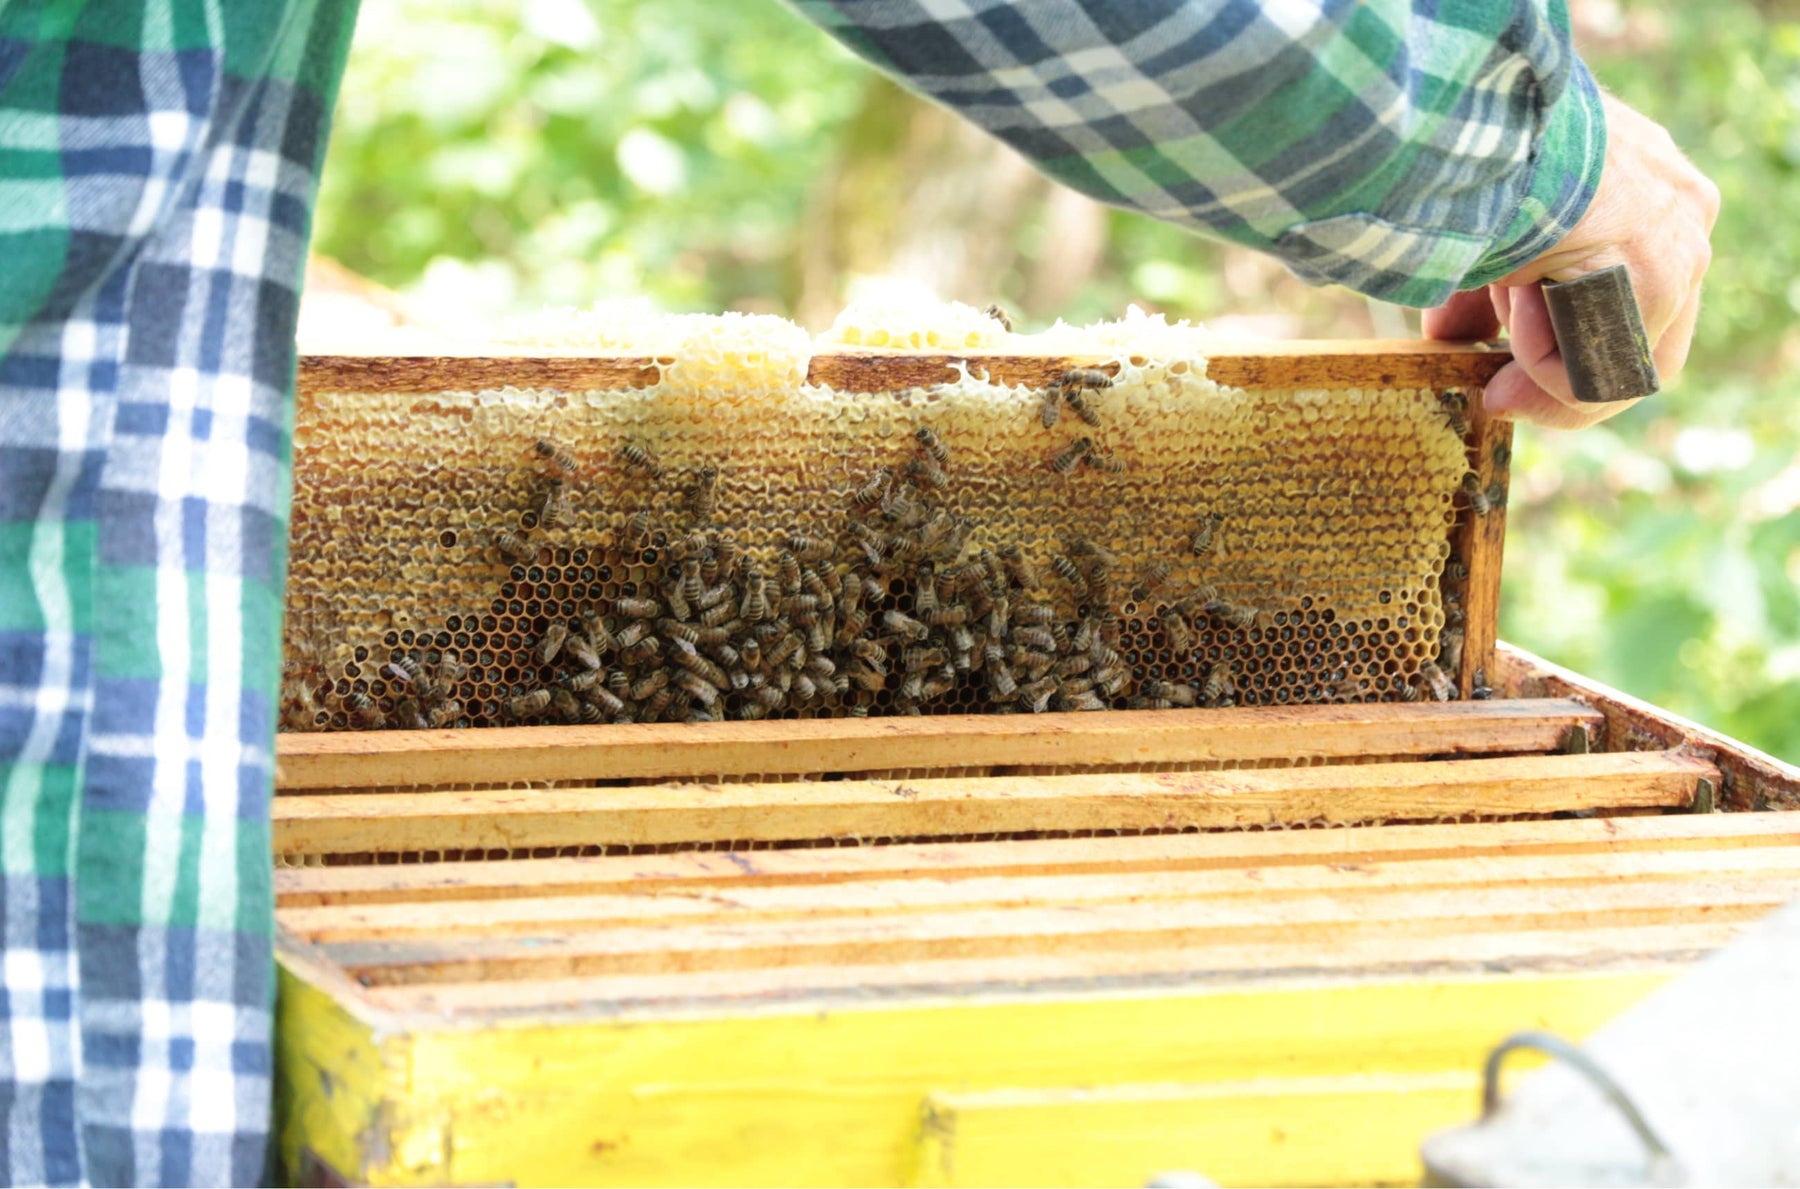 Beekeeper removing honeycomb from a beehive. He is holding a special tool to help him.